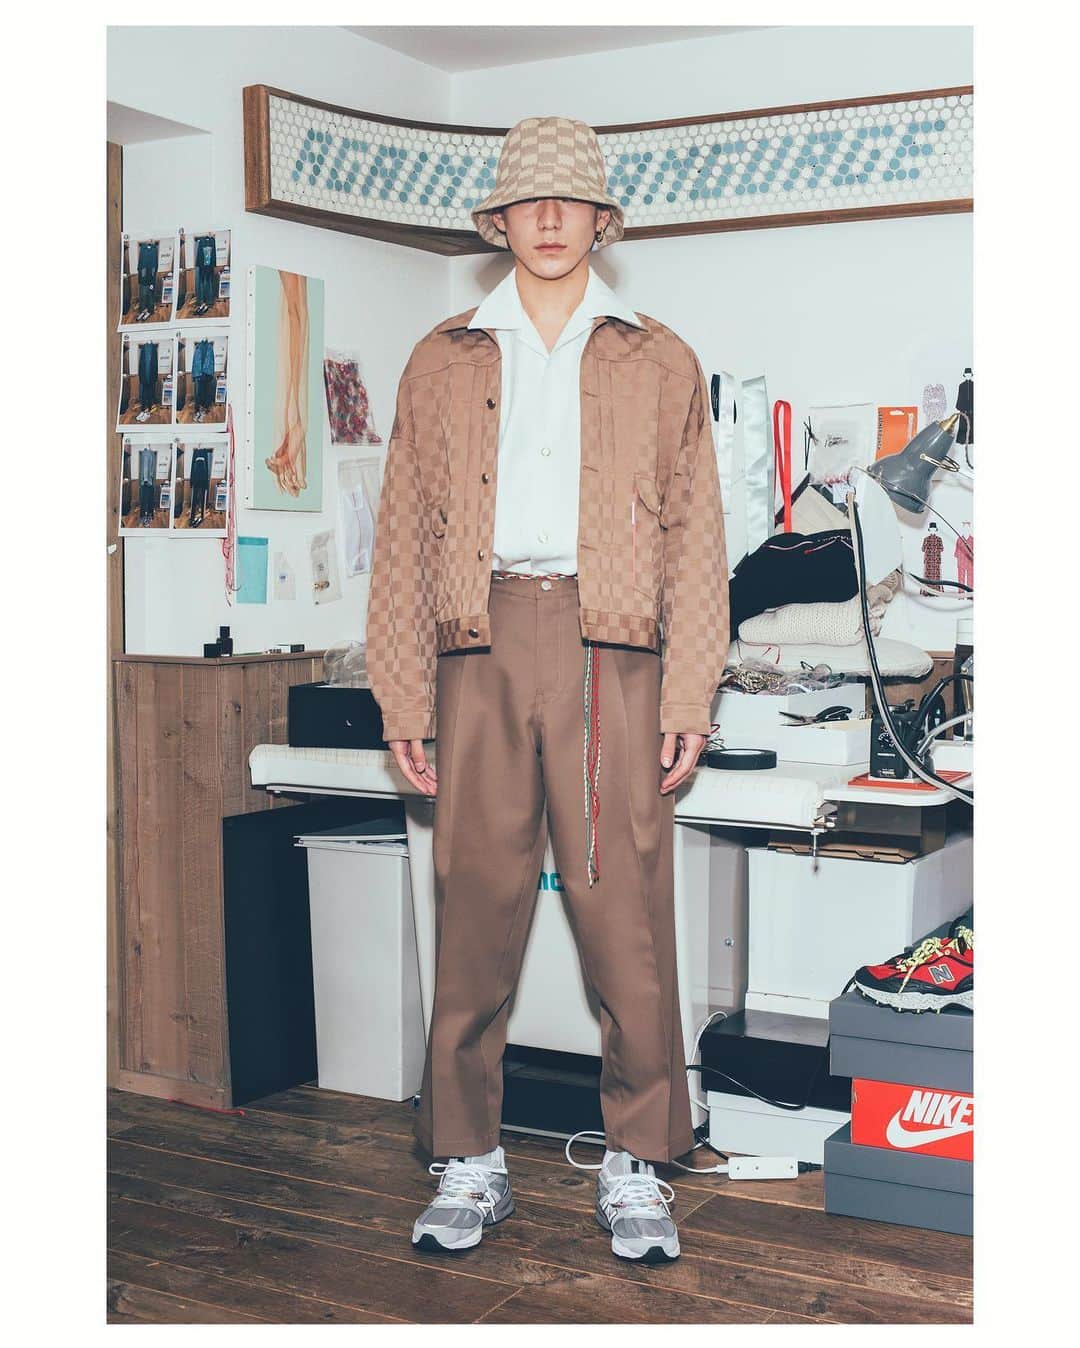 NEONSIGNのインスタグラム：「…2021 SPRING SUMMER COLLECTION﻿ ﻿ “MMMMMMWMMM”﻿ ﻿ Whenever you find that you are on the side of the Majority, it is to reform.﻿ ﻿ …﻿ ﻿ Directed by﻿ ﻿ Photographer：TARO MIZUTANI﻿ Stylist：LAMBDA TAKAHASHI﻿ Hair & Make-up：MASANORI KOBAYASHI﻿ ﻿ Model：﻿KAKUYUU ﻿ ...﻿ #NEONSIGN﻿ #ASUKAHAYASHI﻿ #MMMMMMWMMM」